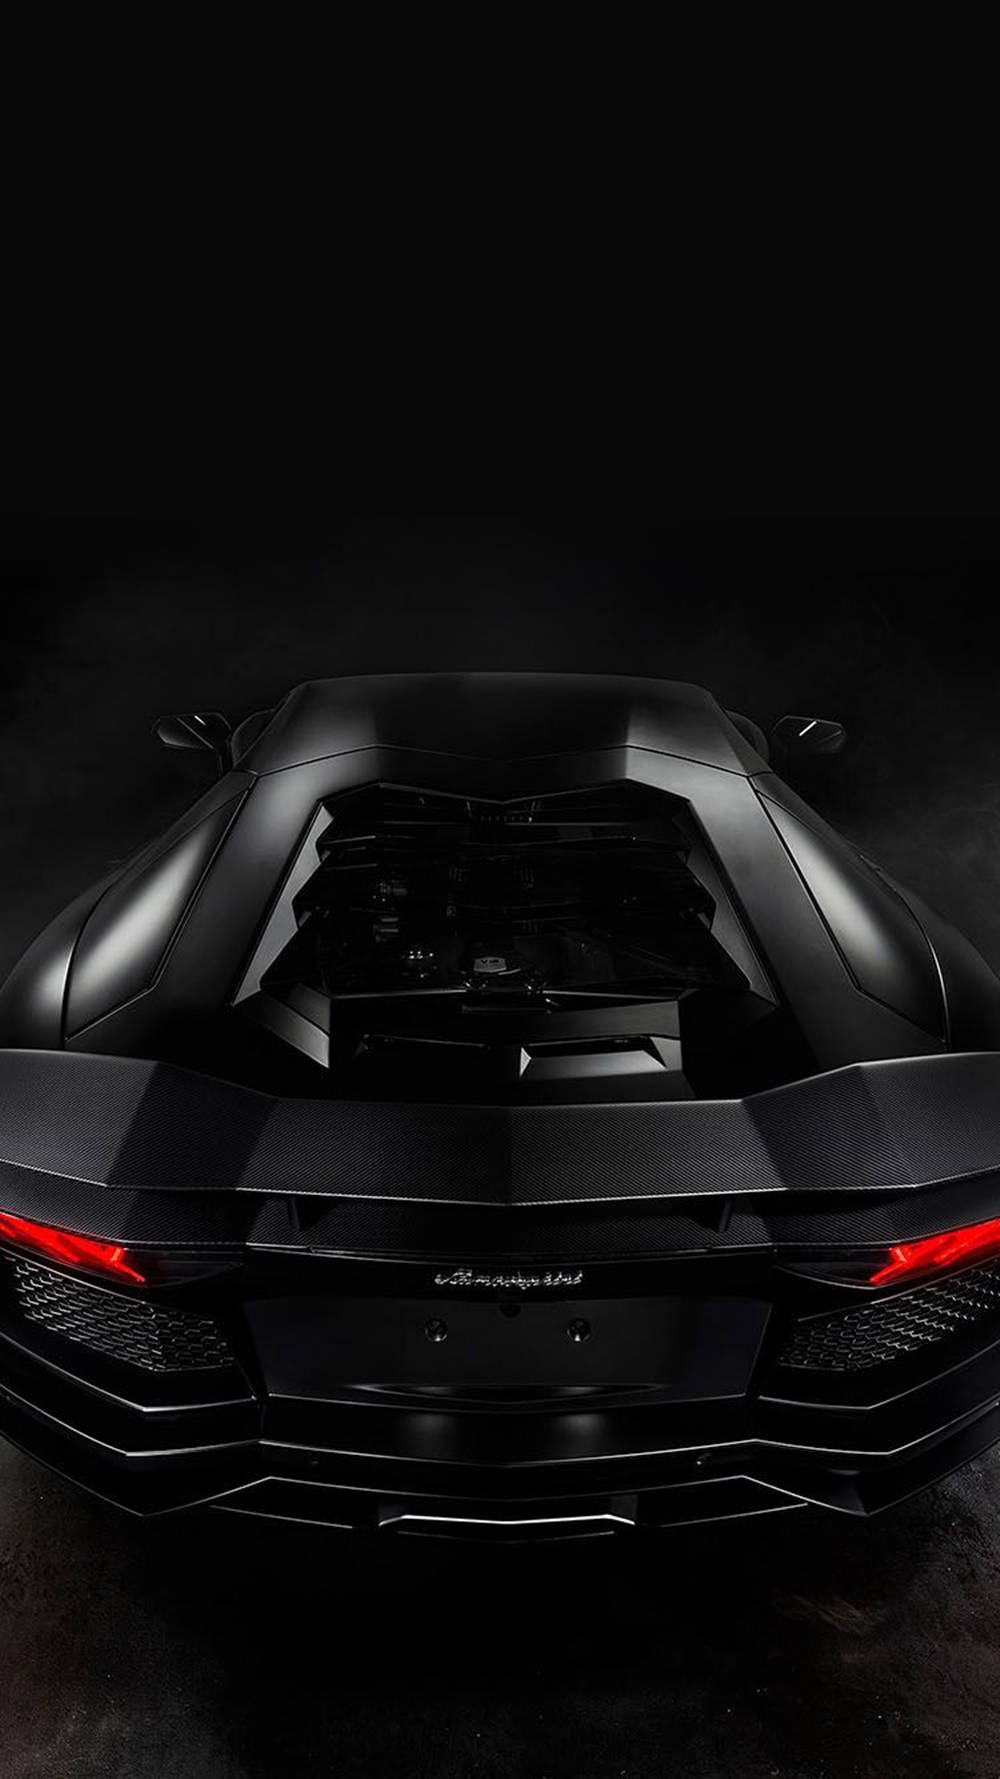 Premium AI Image | Wallpapers for iphone is about black car wallpaper,  night wallpaper, night wallpaper, iphone wallpaper, wallpaper backgrounds, iphone  wallpaper, iphone wallpaper, iphone wall